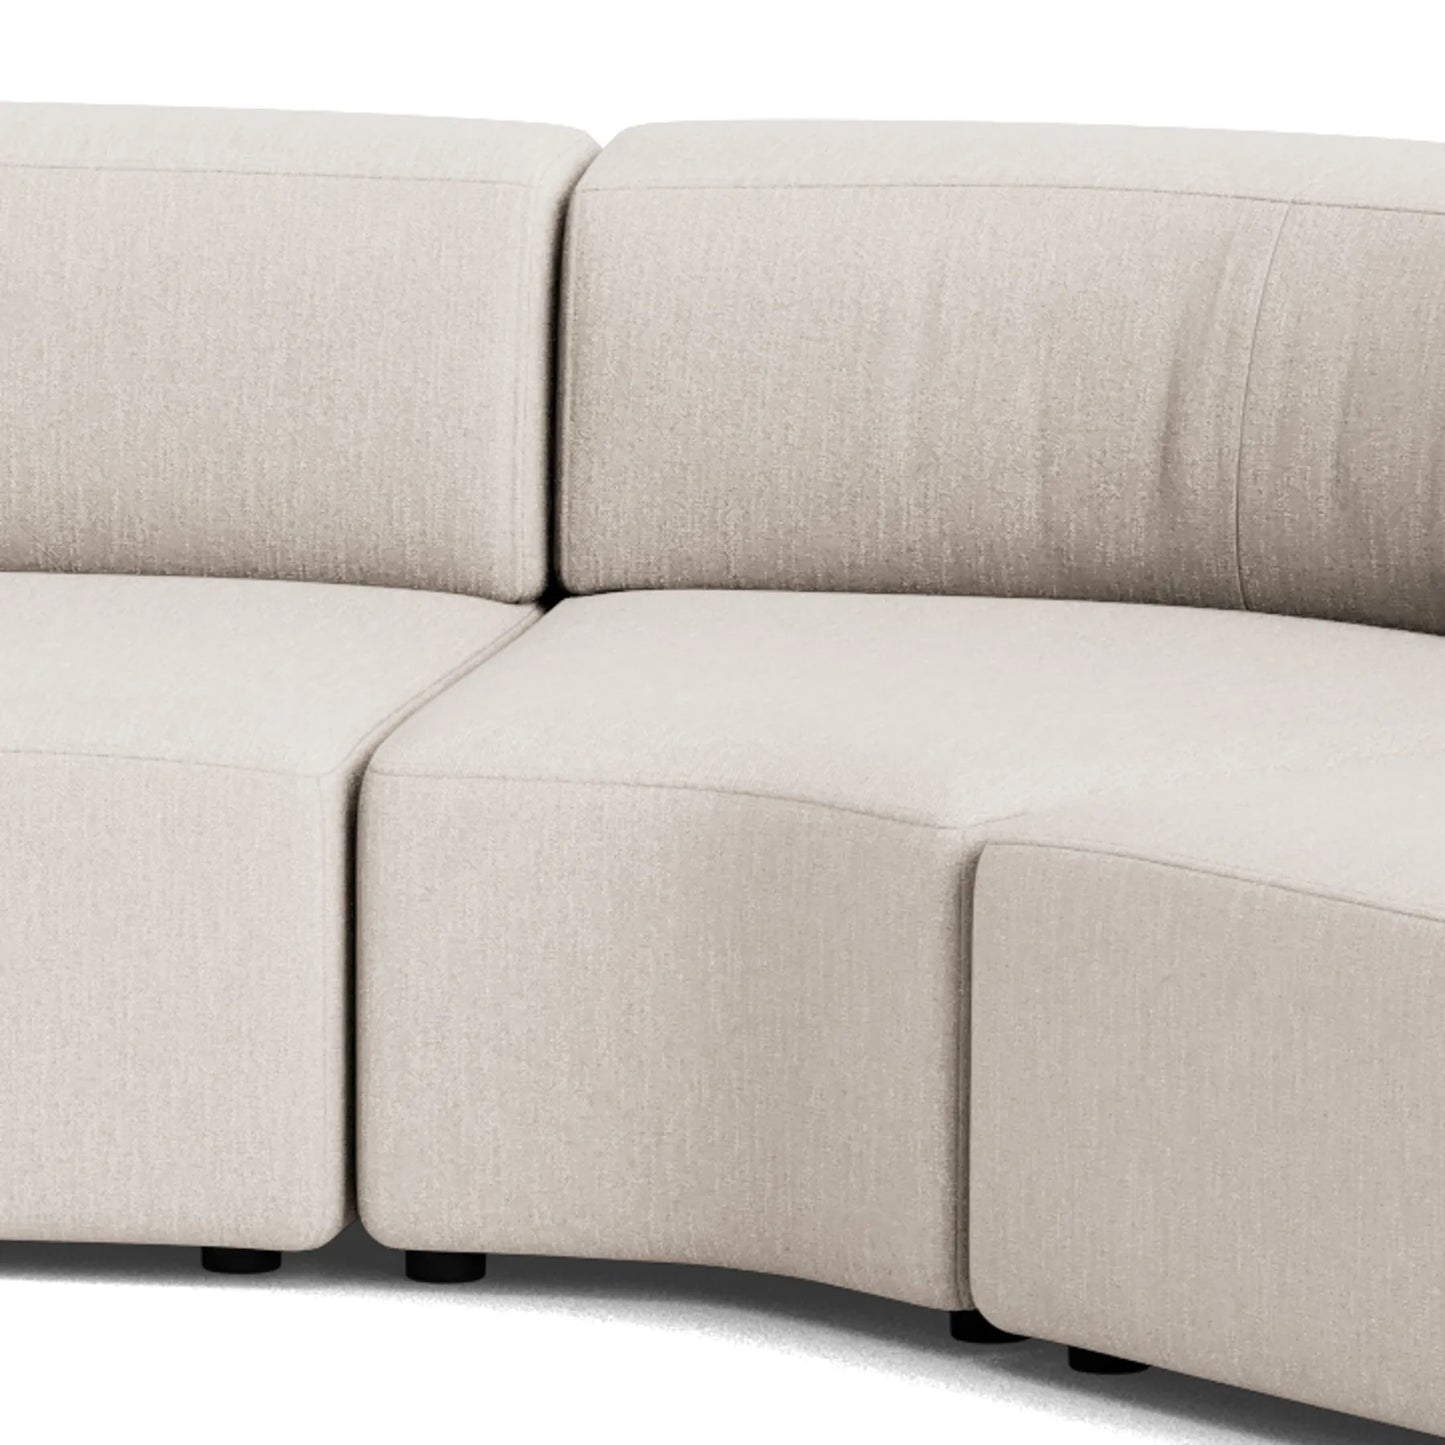 Stretch Large Closed Chaise Sofa - Silex Off White